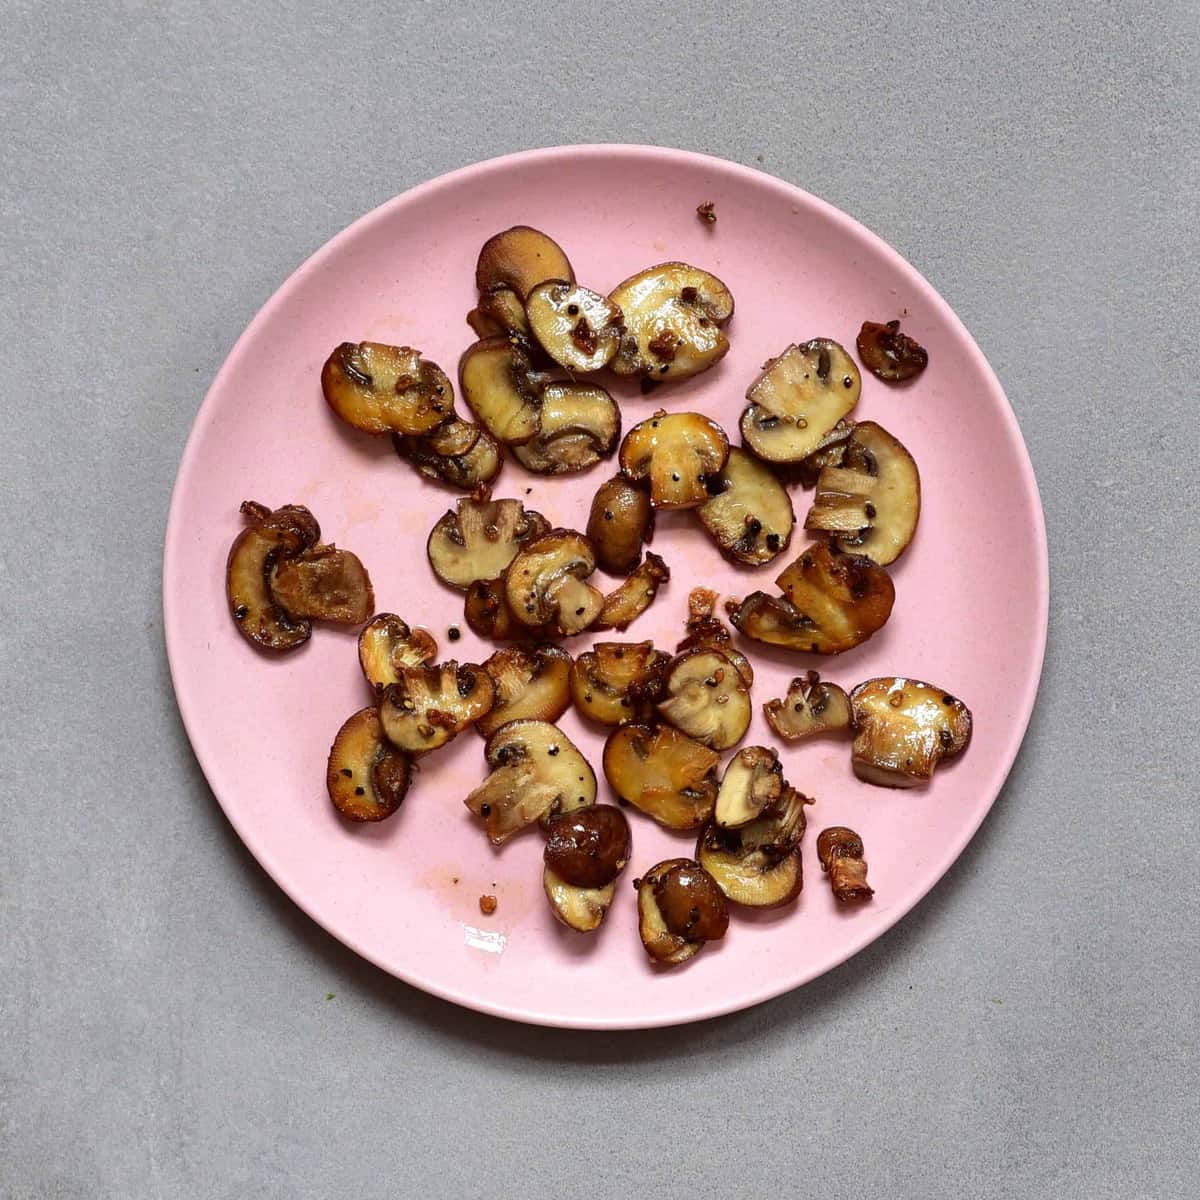 Cooked mushroom slices on a pink plate